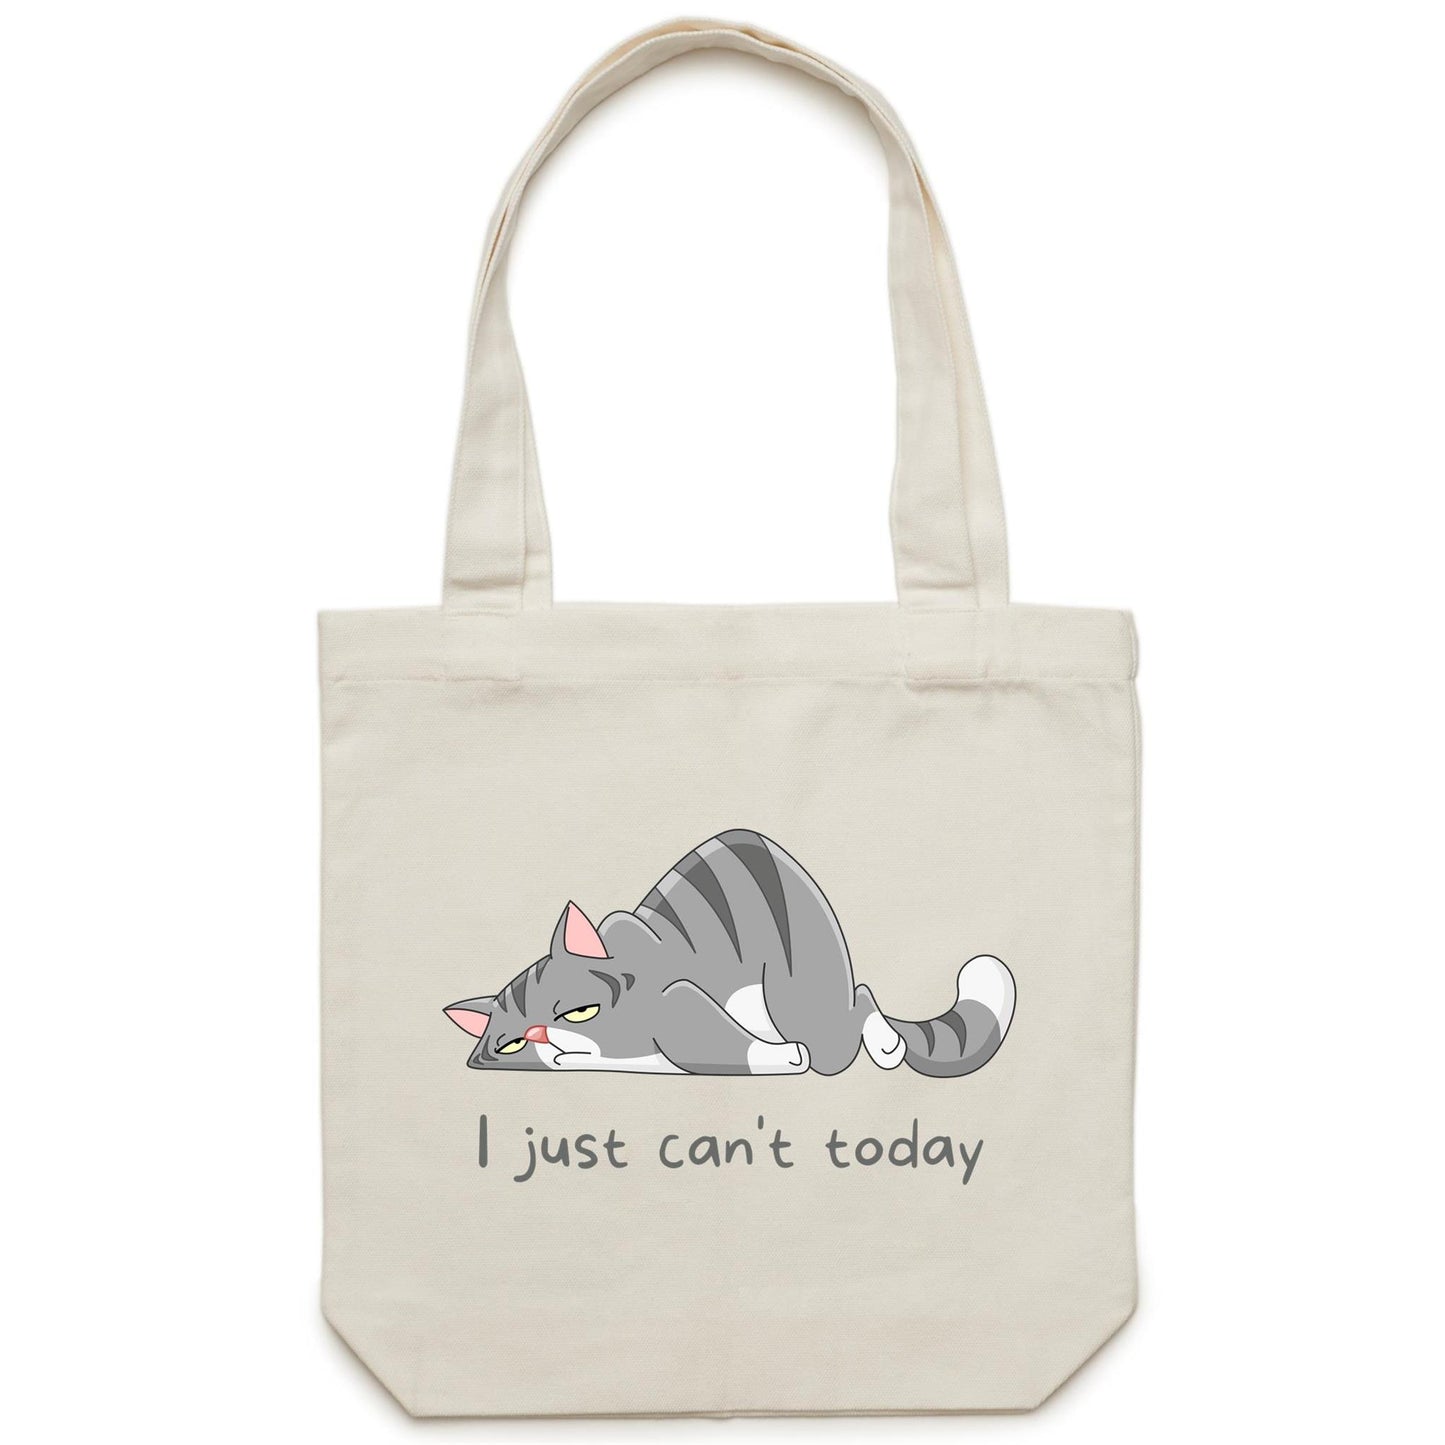 Cat, I just Can't Today - Canvas Tote Bag Cream One Size Tote Bag animal